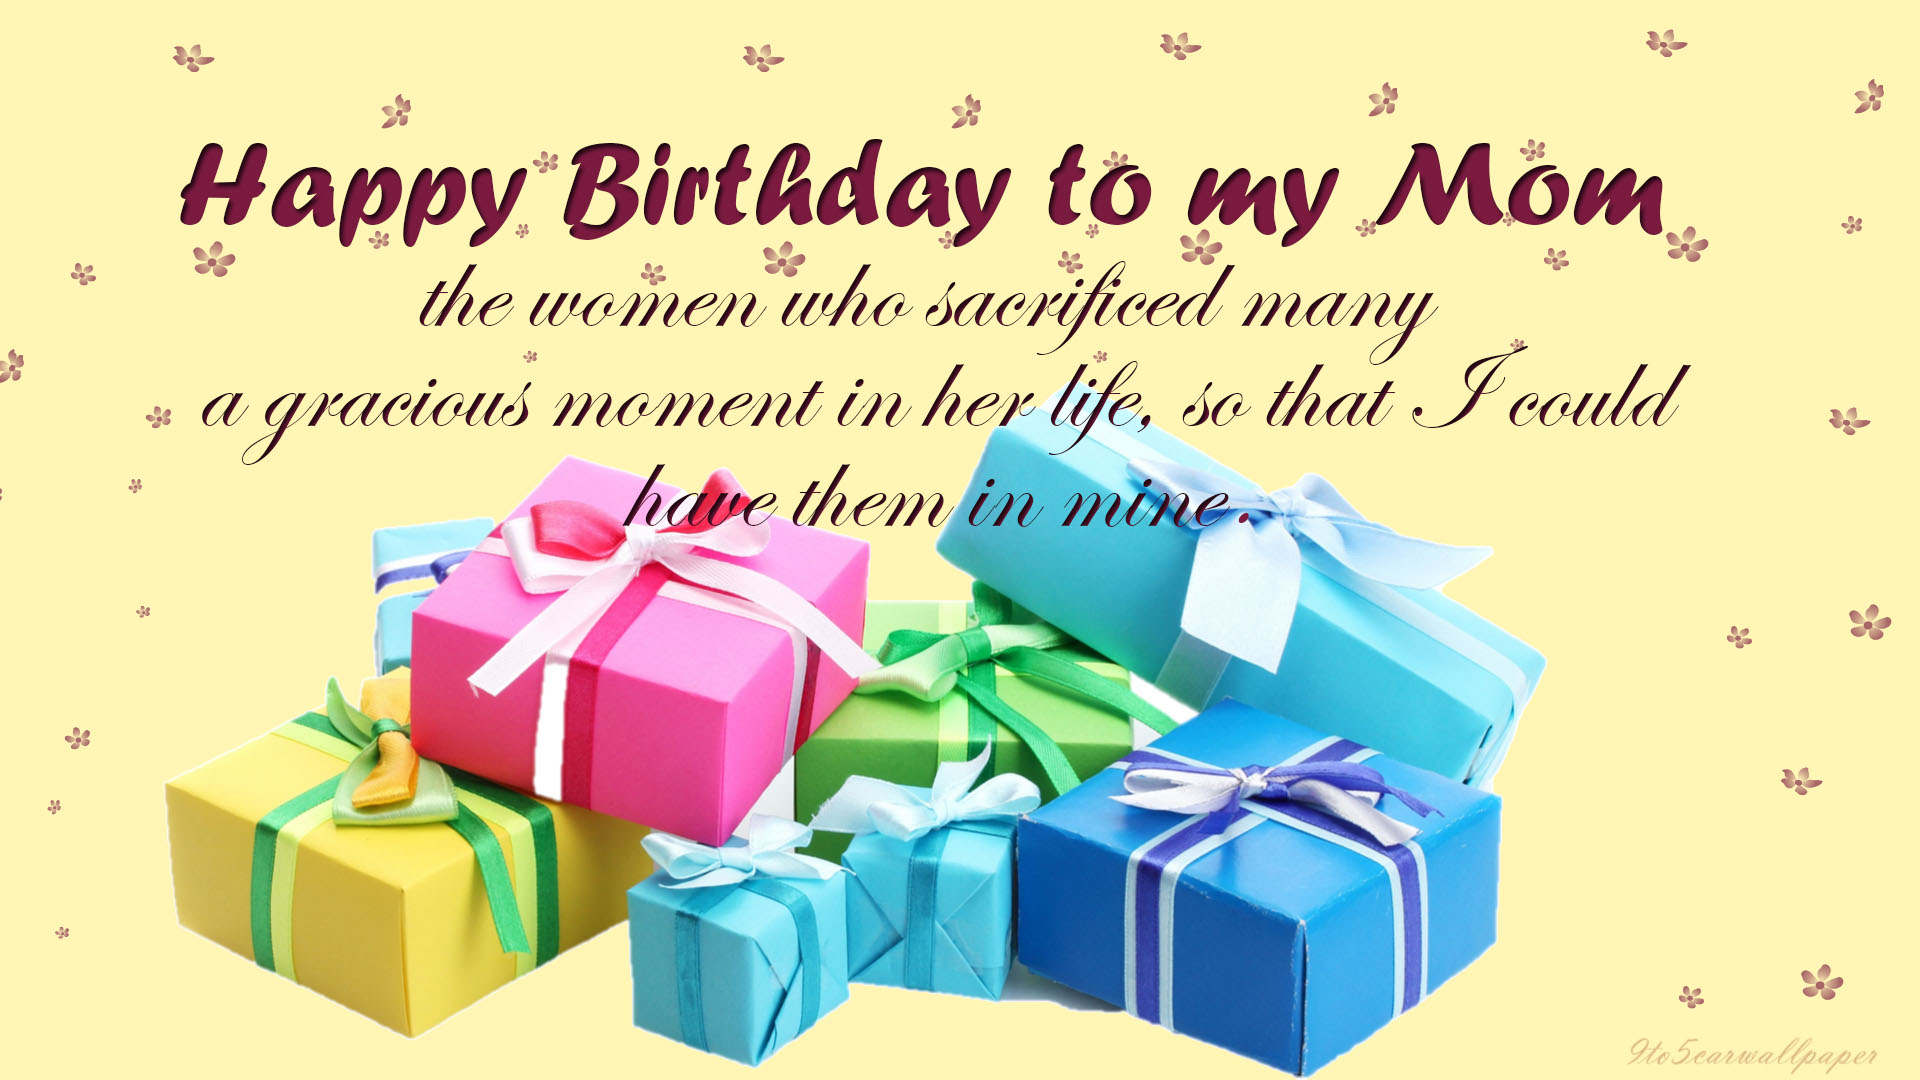 happy-birthday-mom-cards-wishes-quotes-prayers-2018